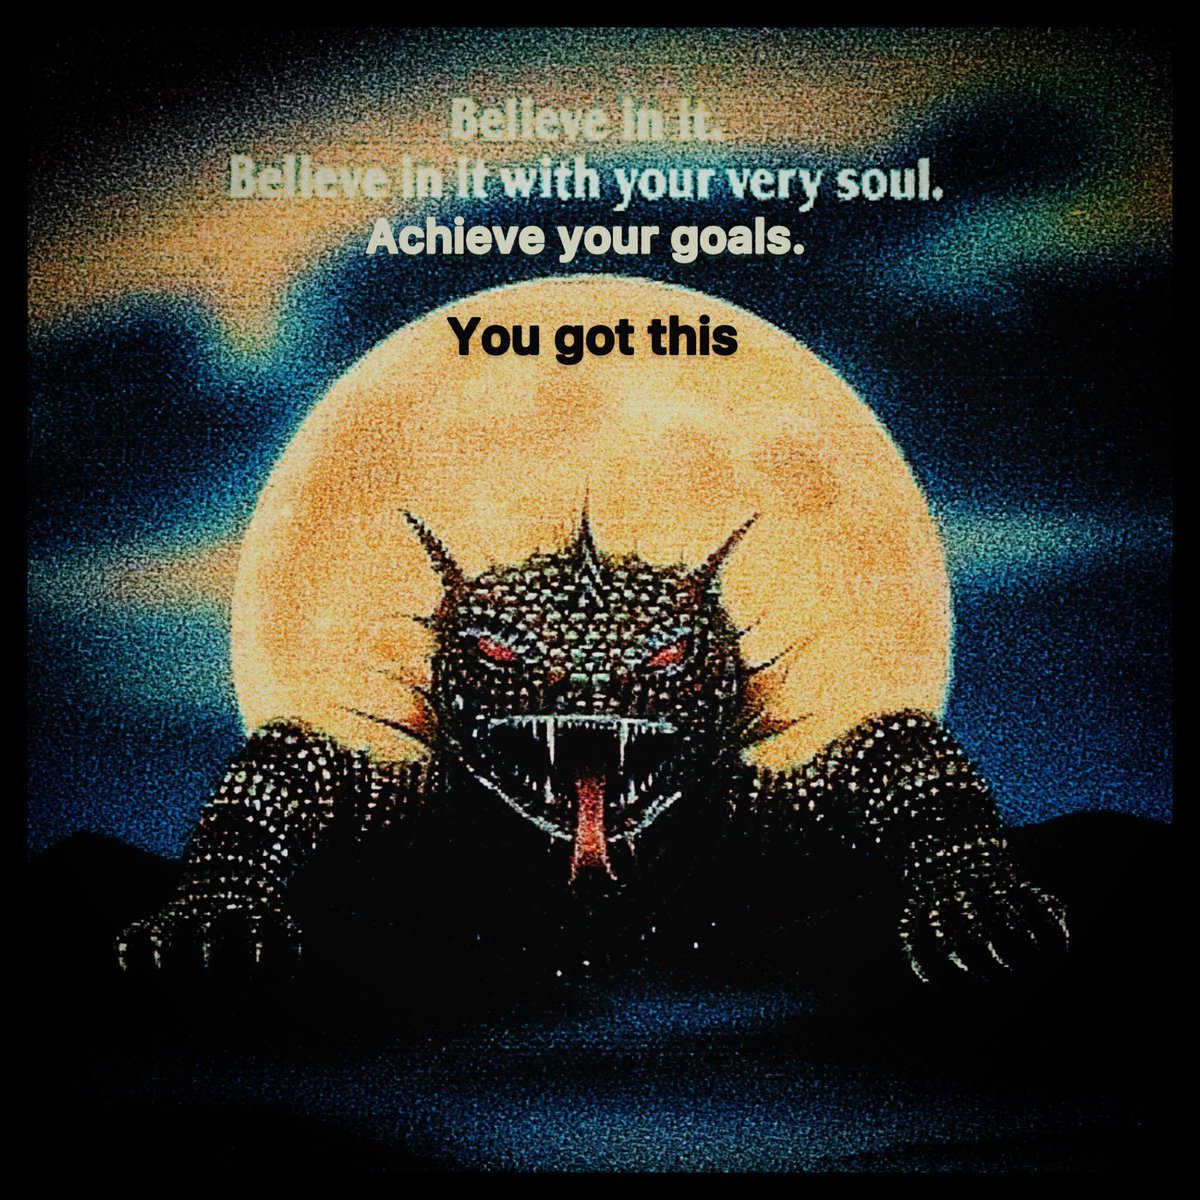 An inspirational message from the creepy, green, lizard monster on the cover of Something Out There.